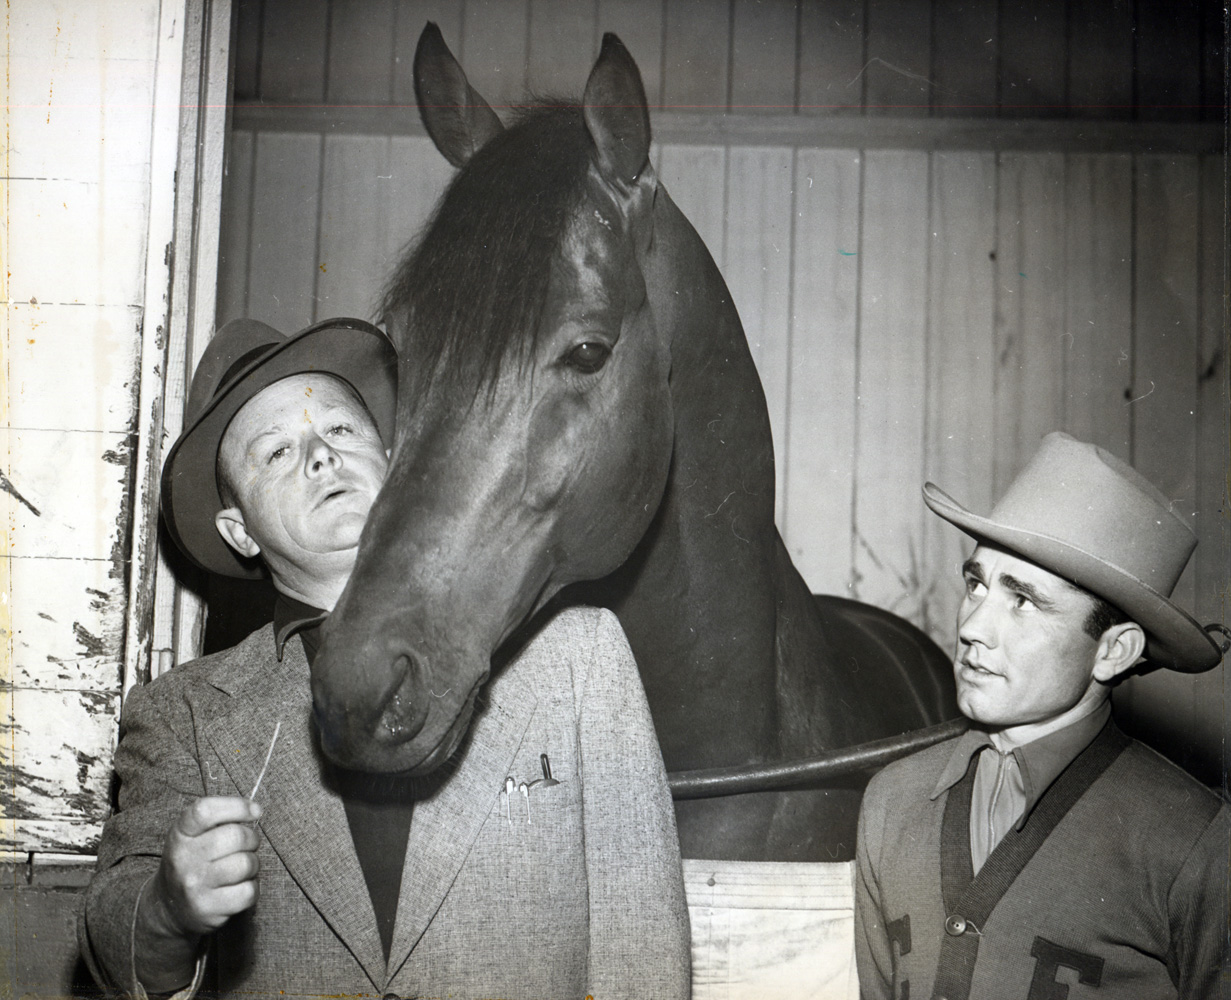 Jimmy Jones, Citation and jockey Steve Brooks in the barn area at Hollywood Park in 1951 (Hollywood Park Photo/Museum Collection)